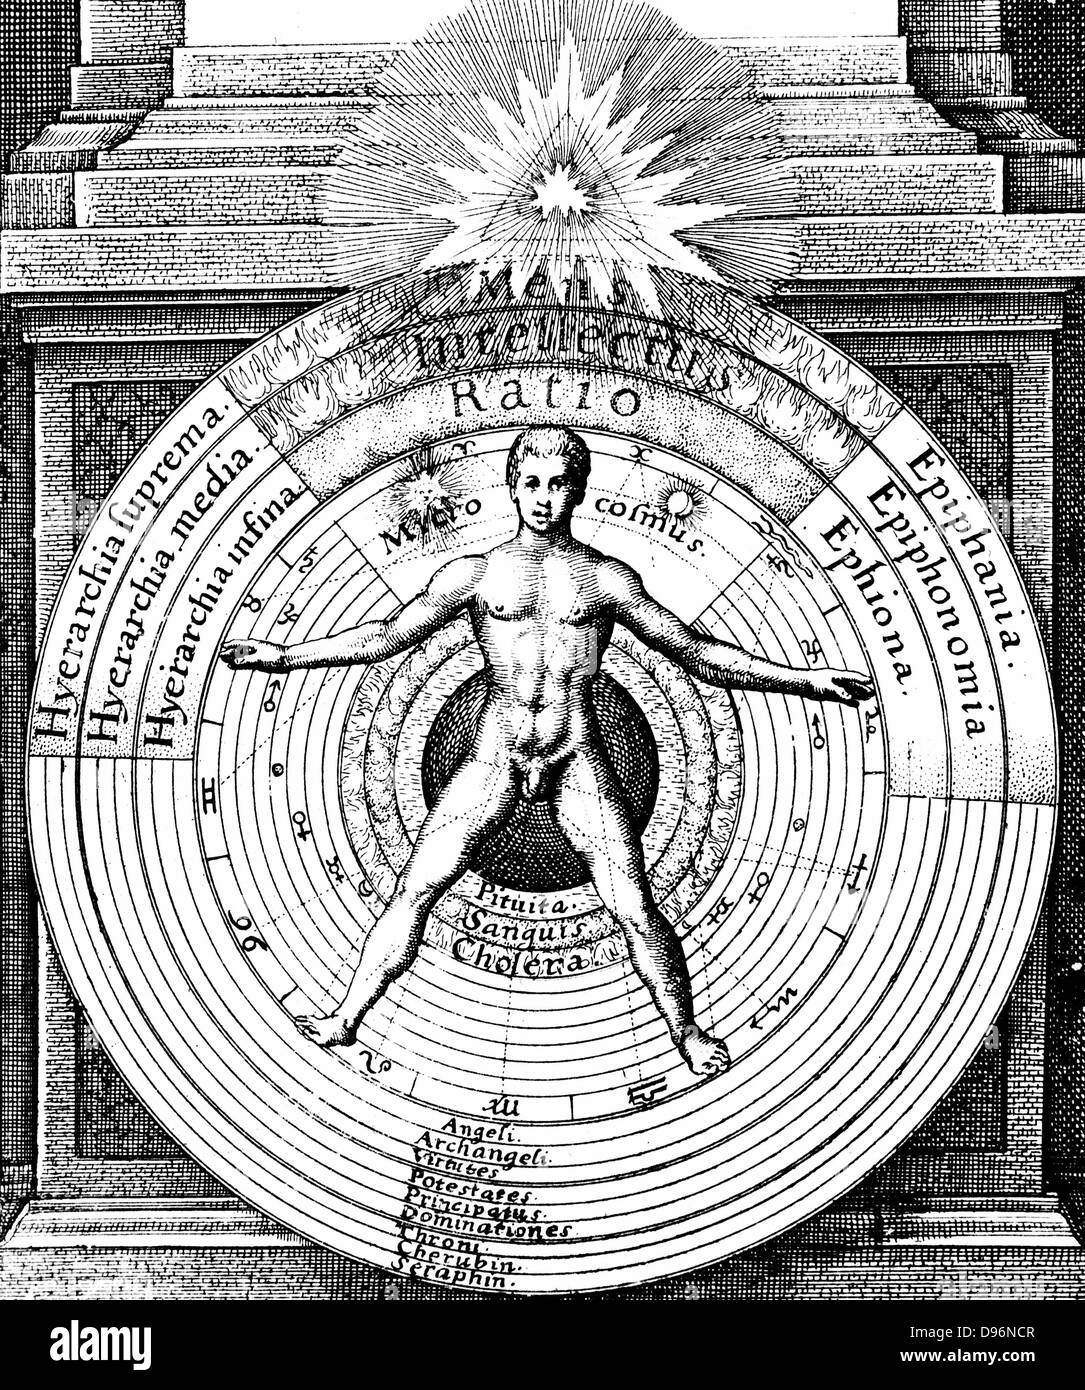 The relation of man, the microcosm with the universe, the macrocosm, showing the spheres of the Sun, Moon and planets and the hierarchy of angels, archangels, leading to the trinity of God represented by triangle at the top. From Robert Fludd 'Ultriusque cosmi... historia', Oppenheim, 1617-1619. Engraving. Stock Photo